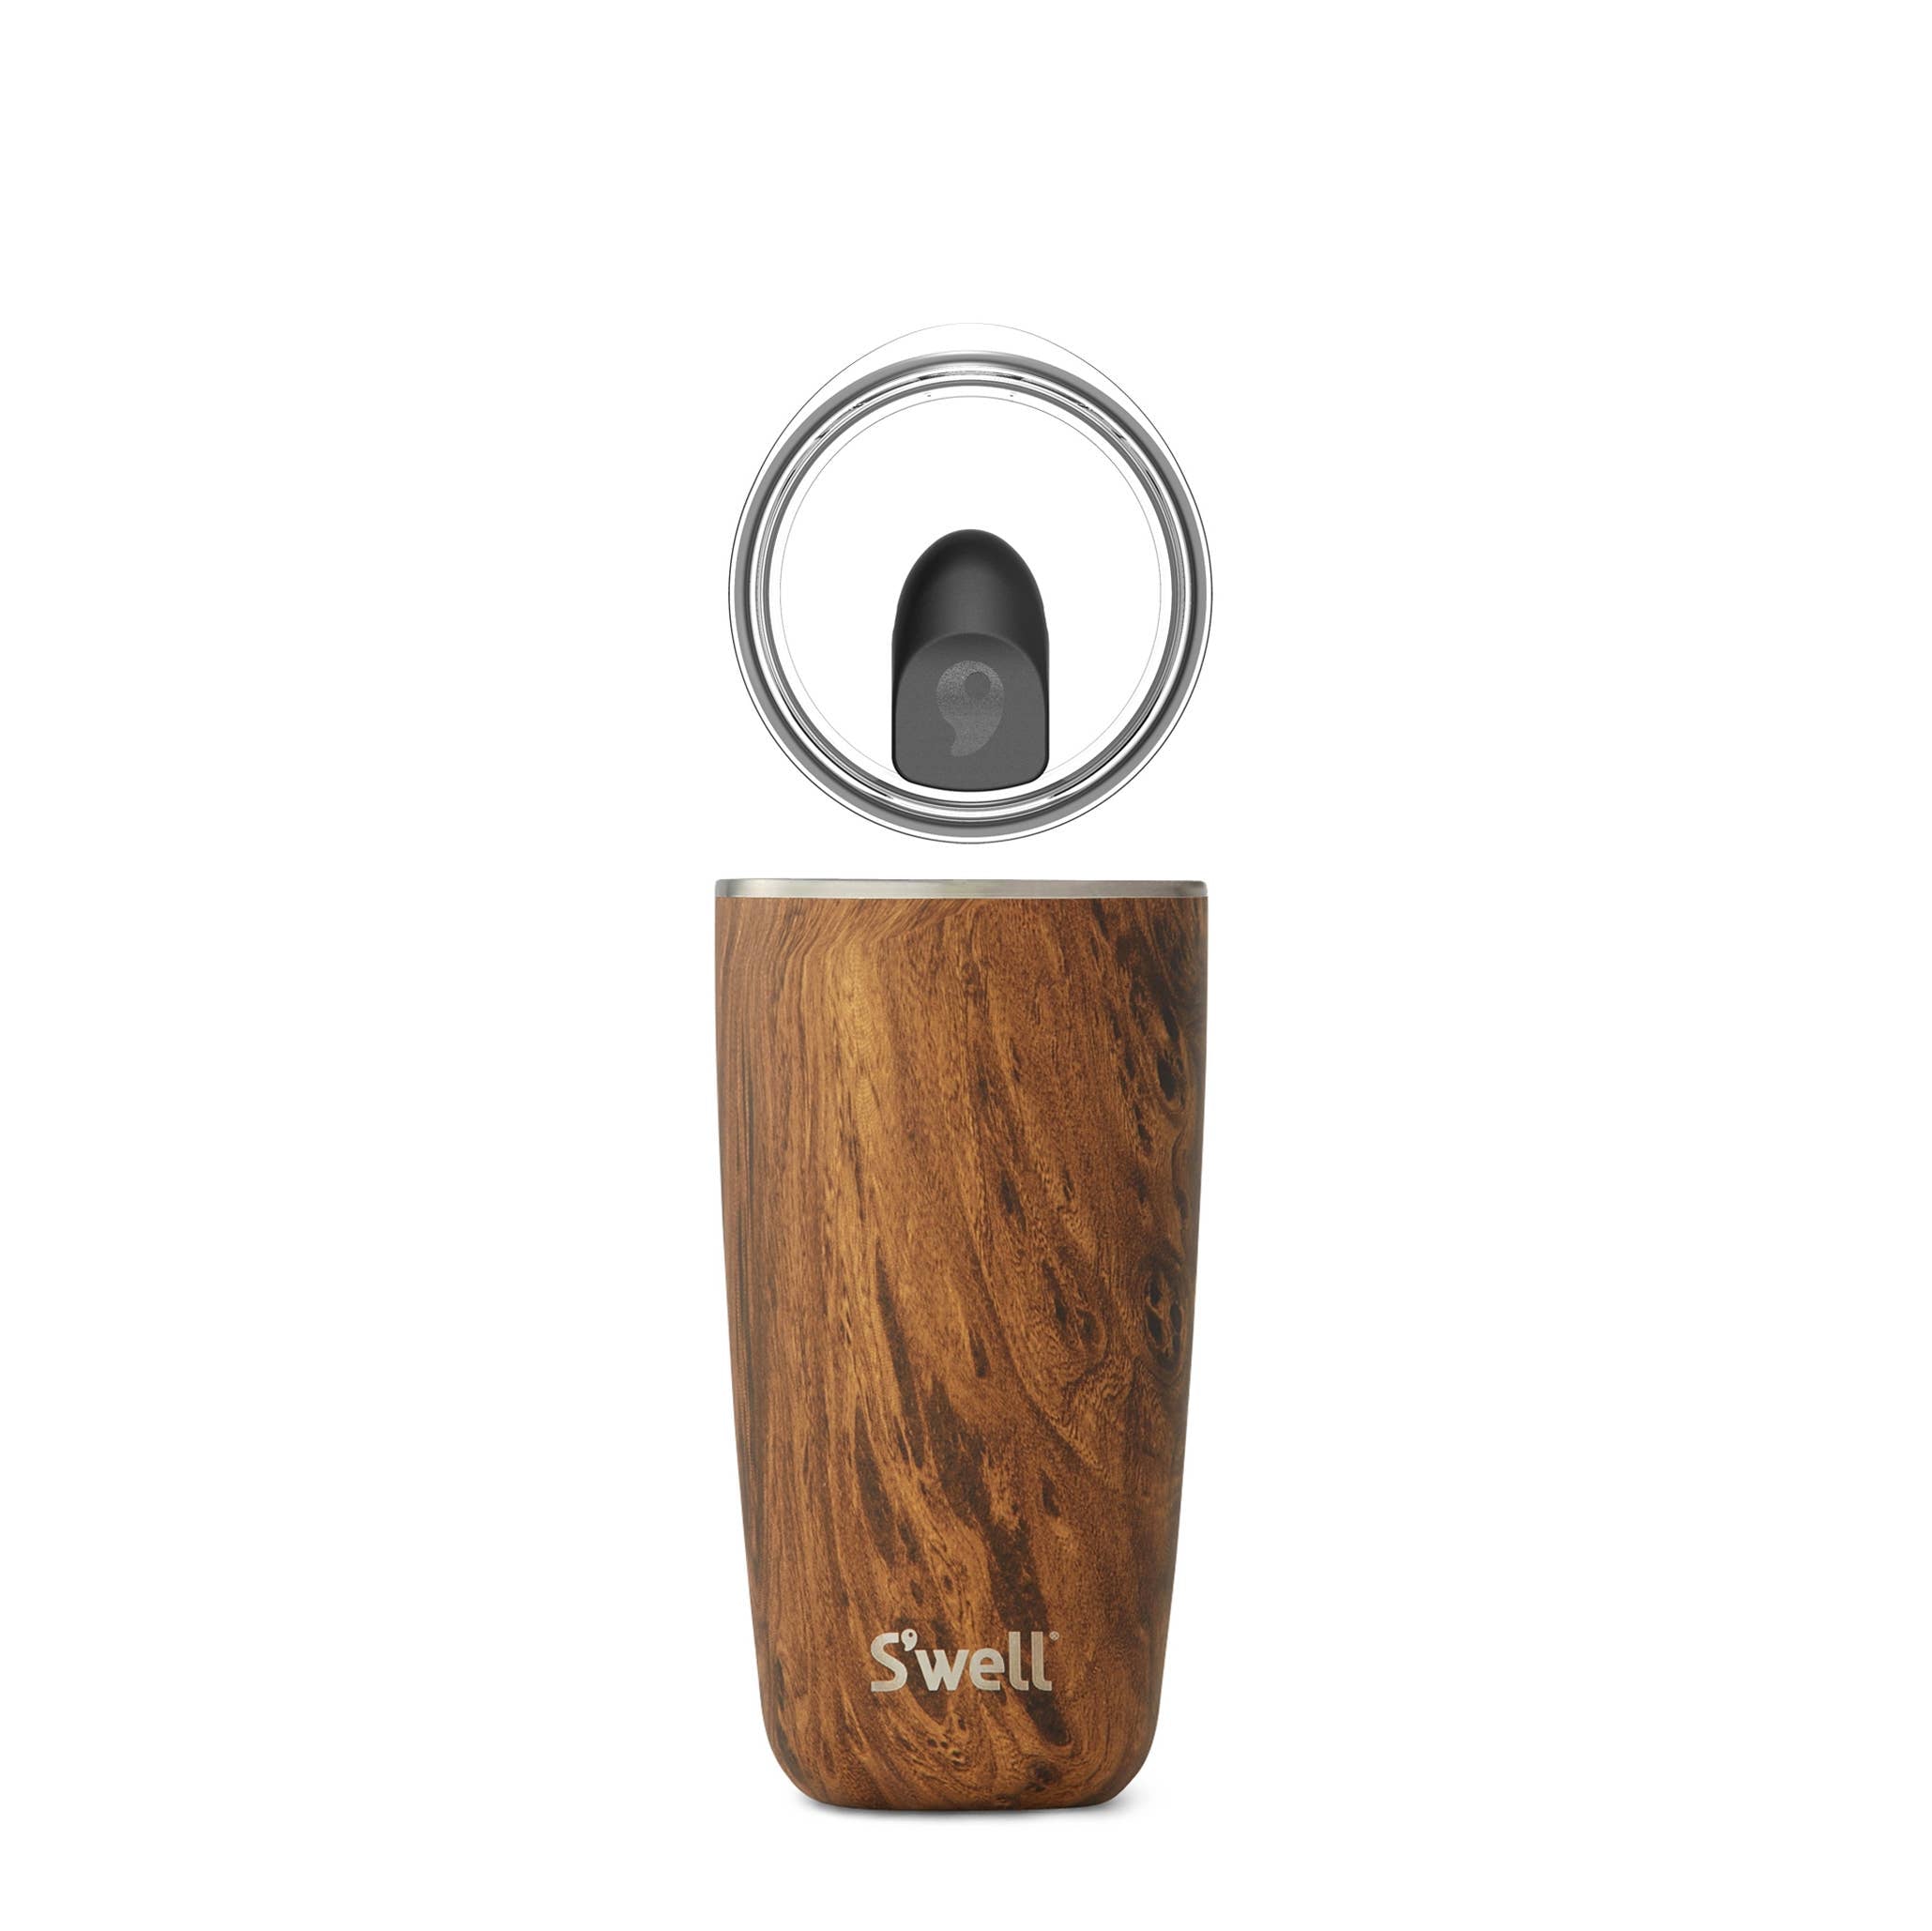 S'well - 18oz. Stainless Steel Teakwood Tumbler with Lid